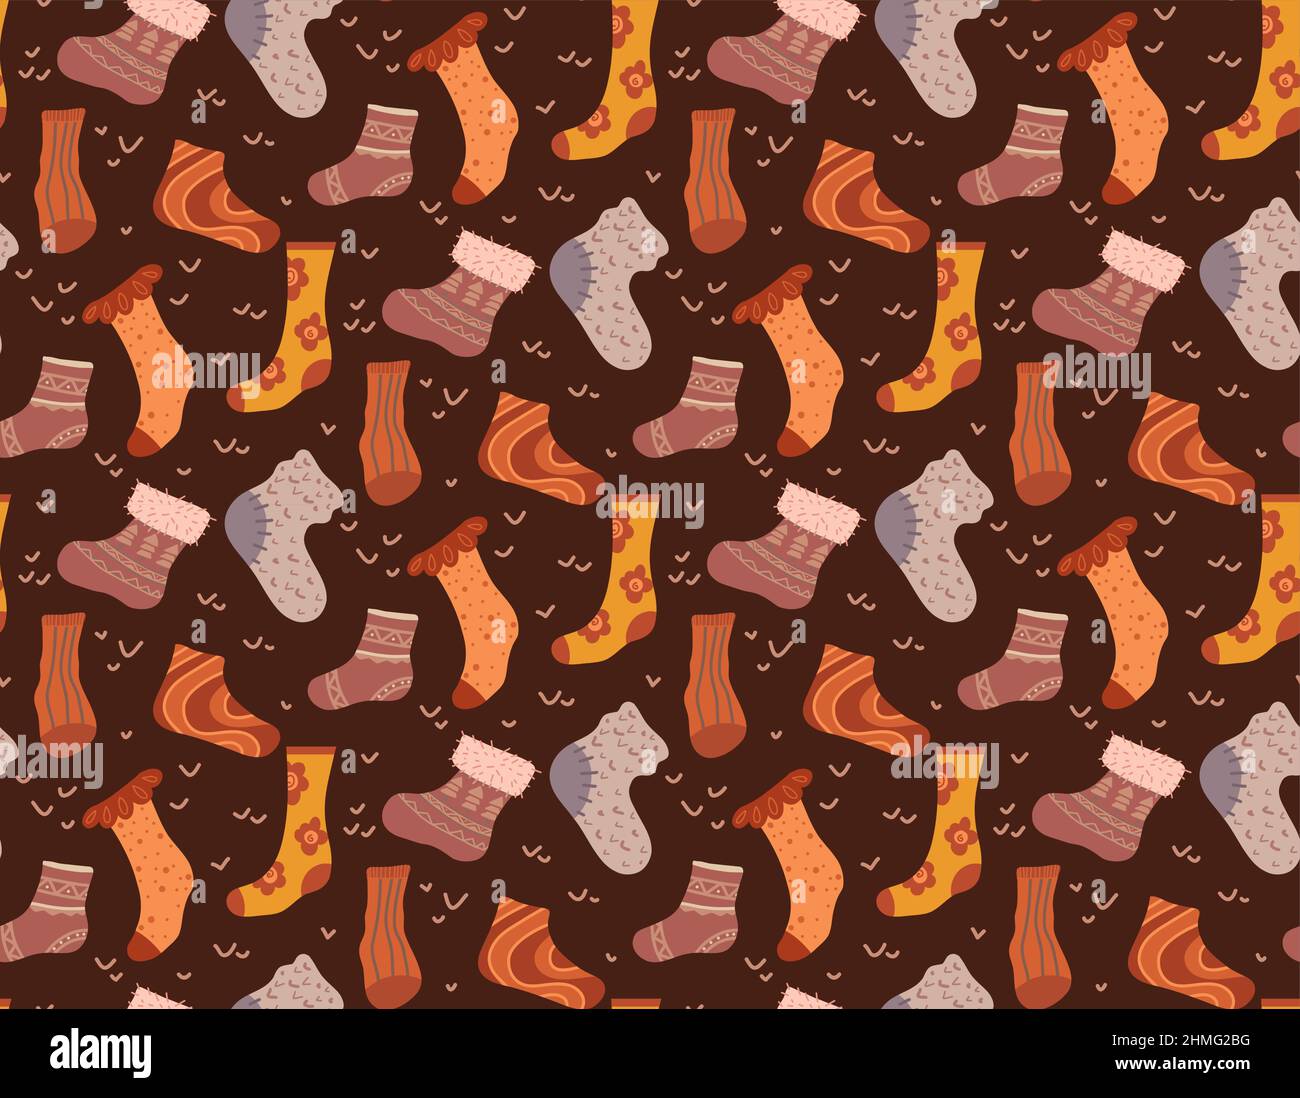 https://c8.alamy.com/comp/2HMG2BG/vector-cozy-seamless-pattern-with-warm-socks-in-brown-colors-texture-with-knitted-clothes-for-legs-wallpaper-with-stockings-and-golfs-flat-hand-dra-2HMG2BG.jpg